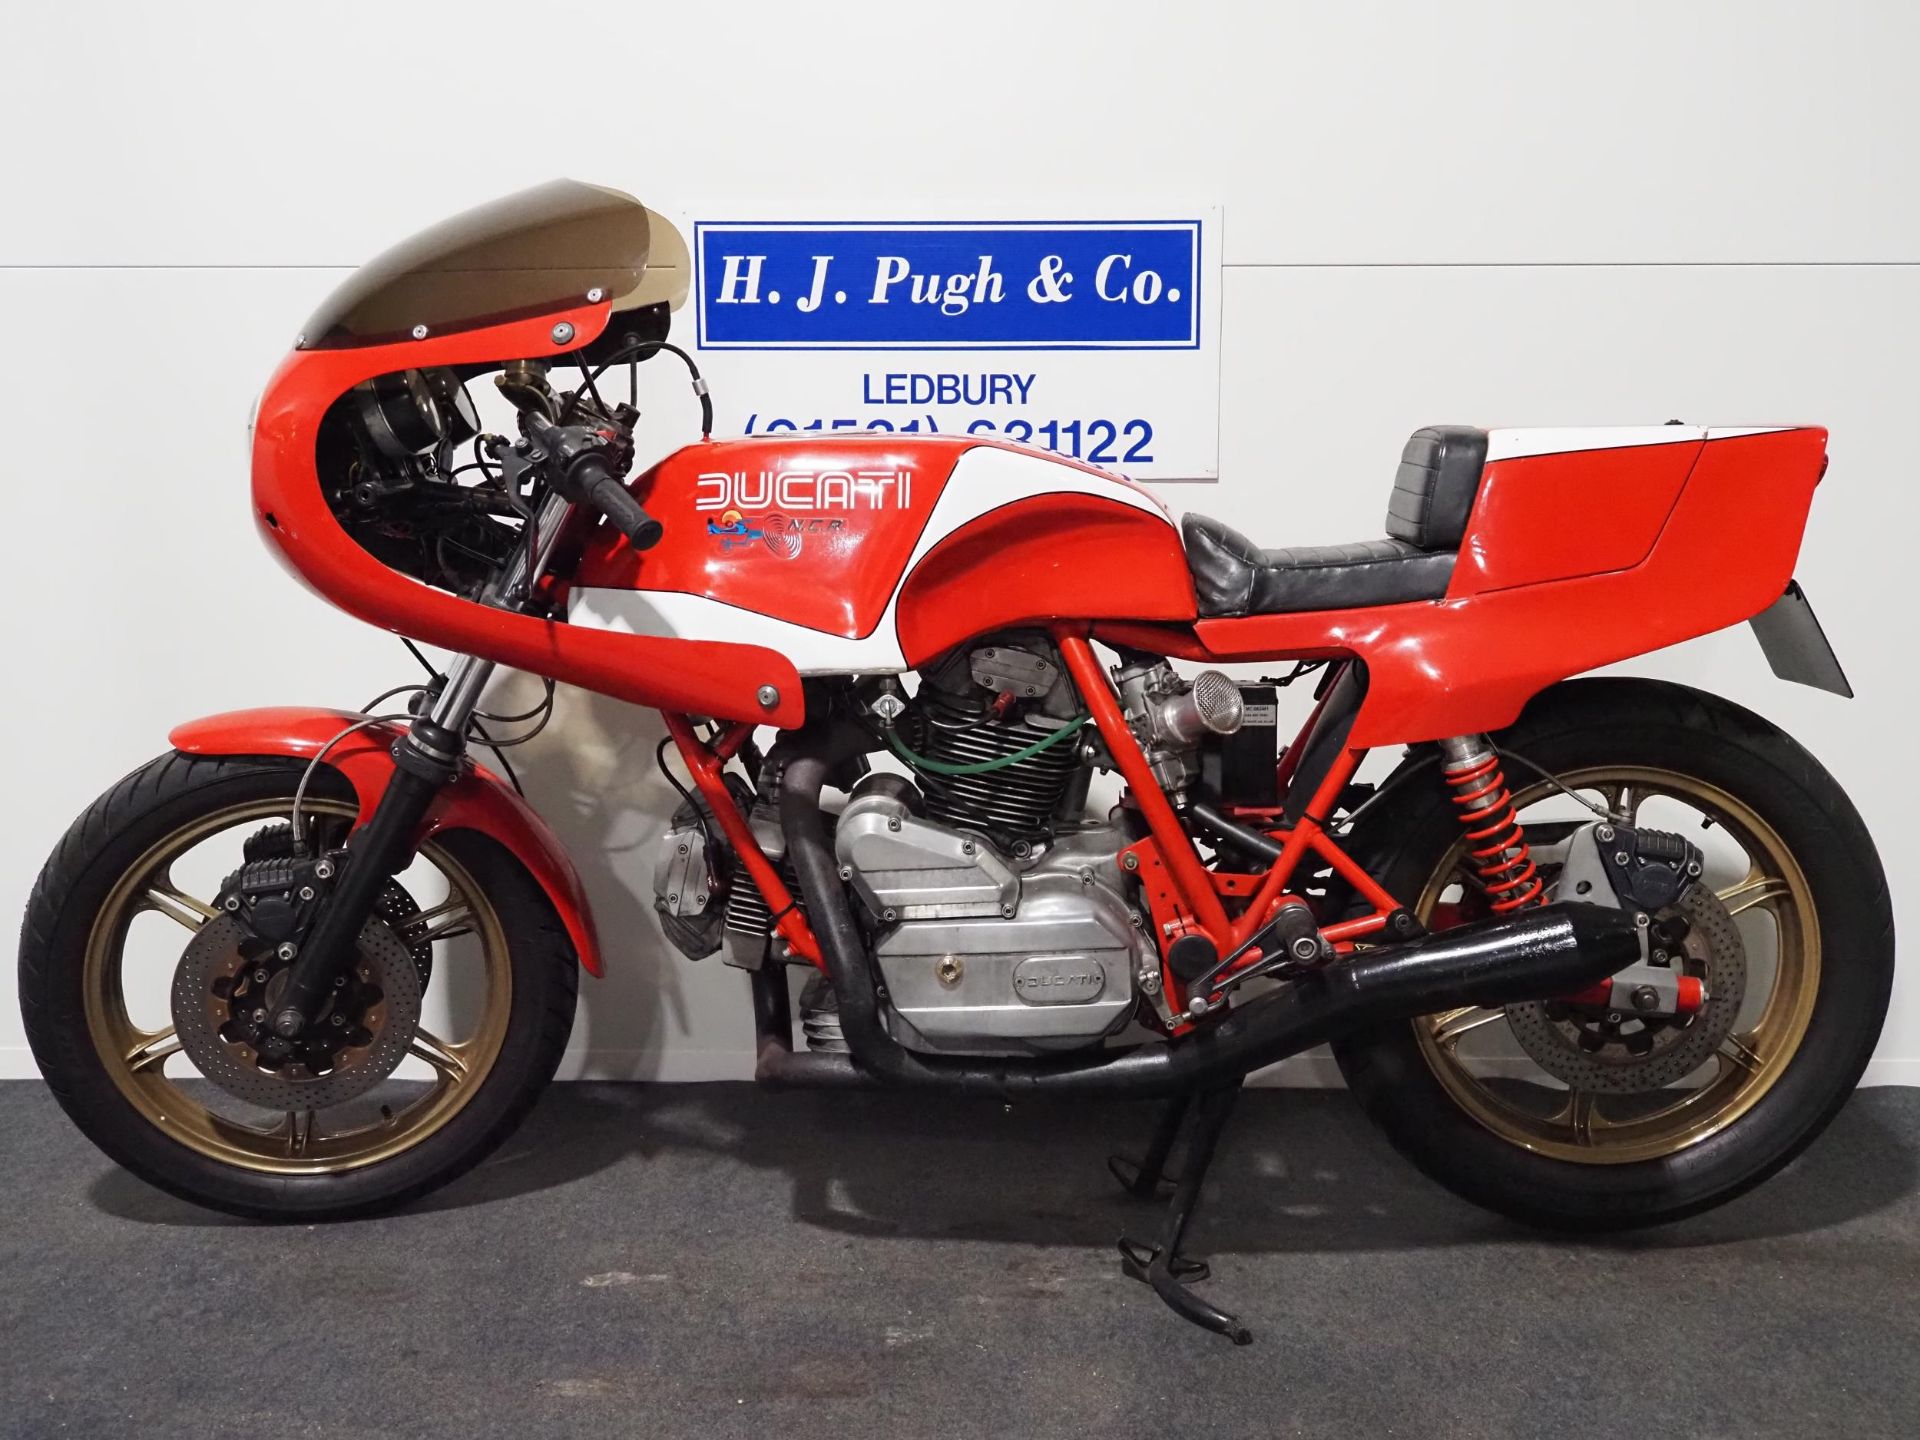 Ducati Darmah motorcycle. 1982. 900cc. Frame No. 952313. Engine No. 906036. Marzocchi forks. 40mm - Image 5 of 5